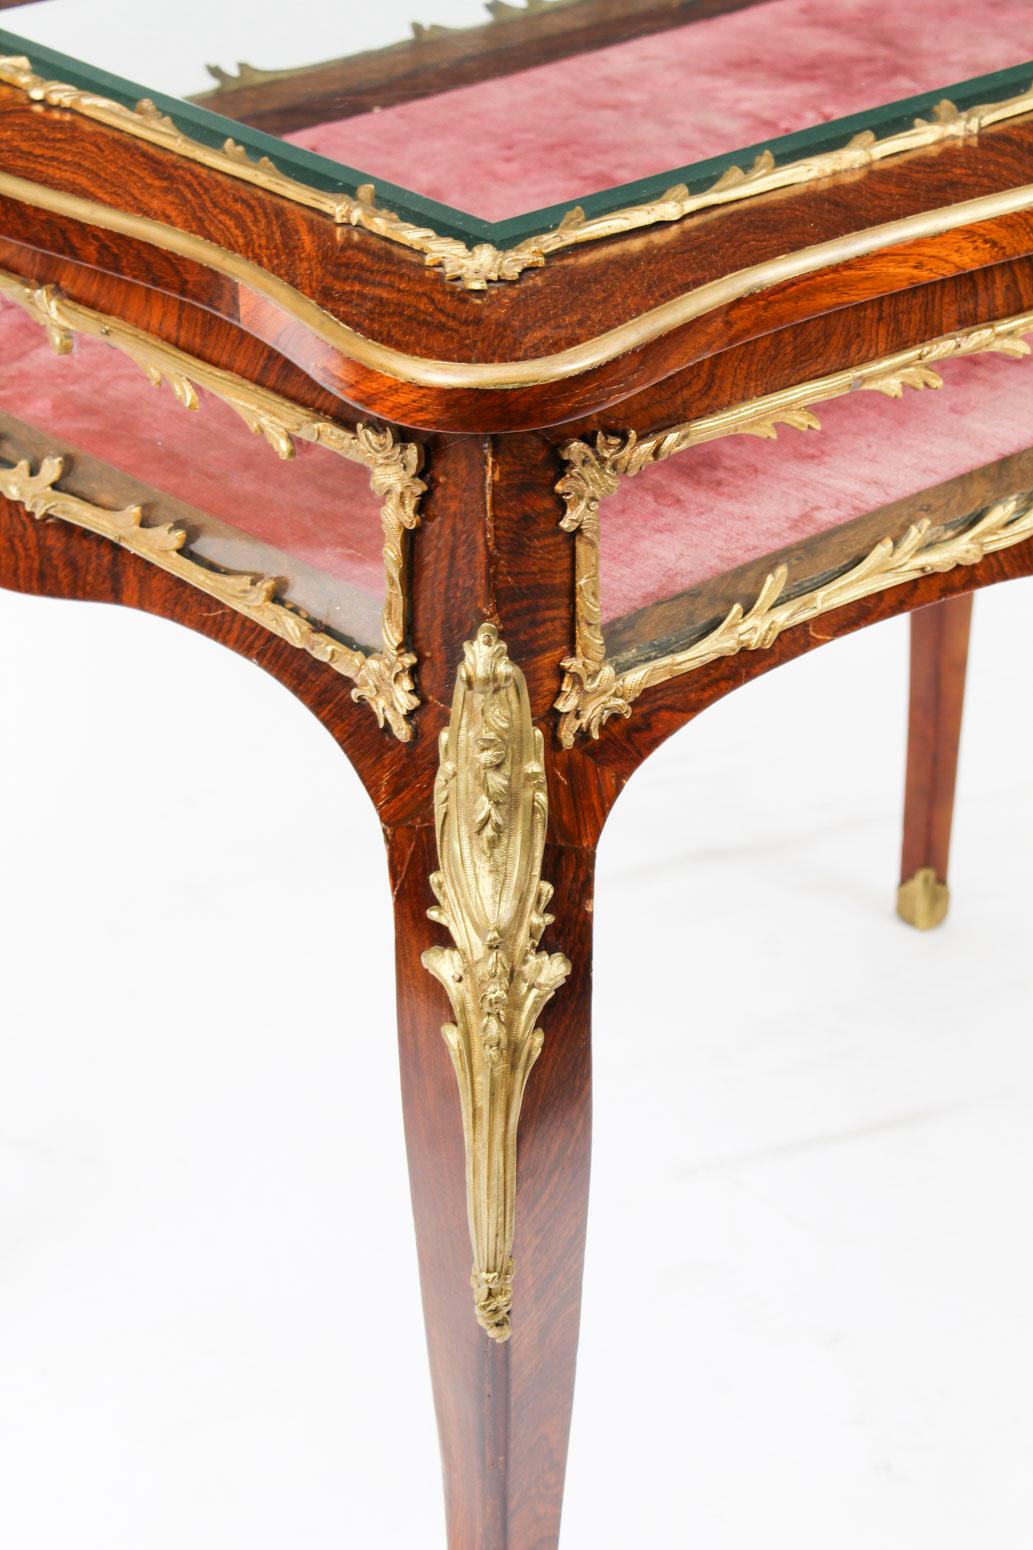 Glass Antique French Ormolu Mounted Bijouterie Display Table, 19th Century